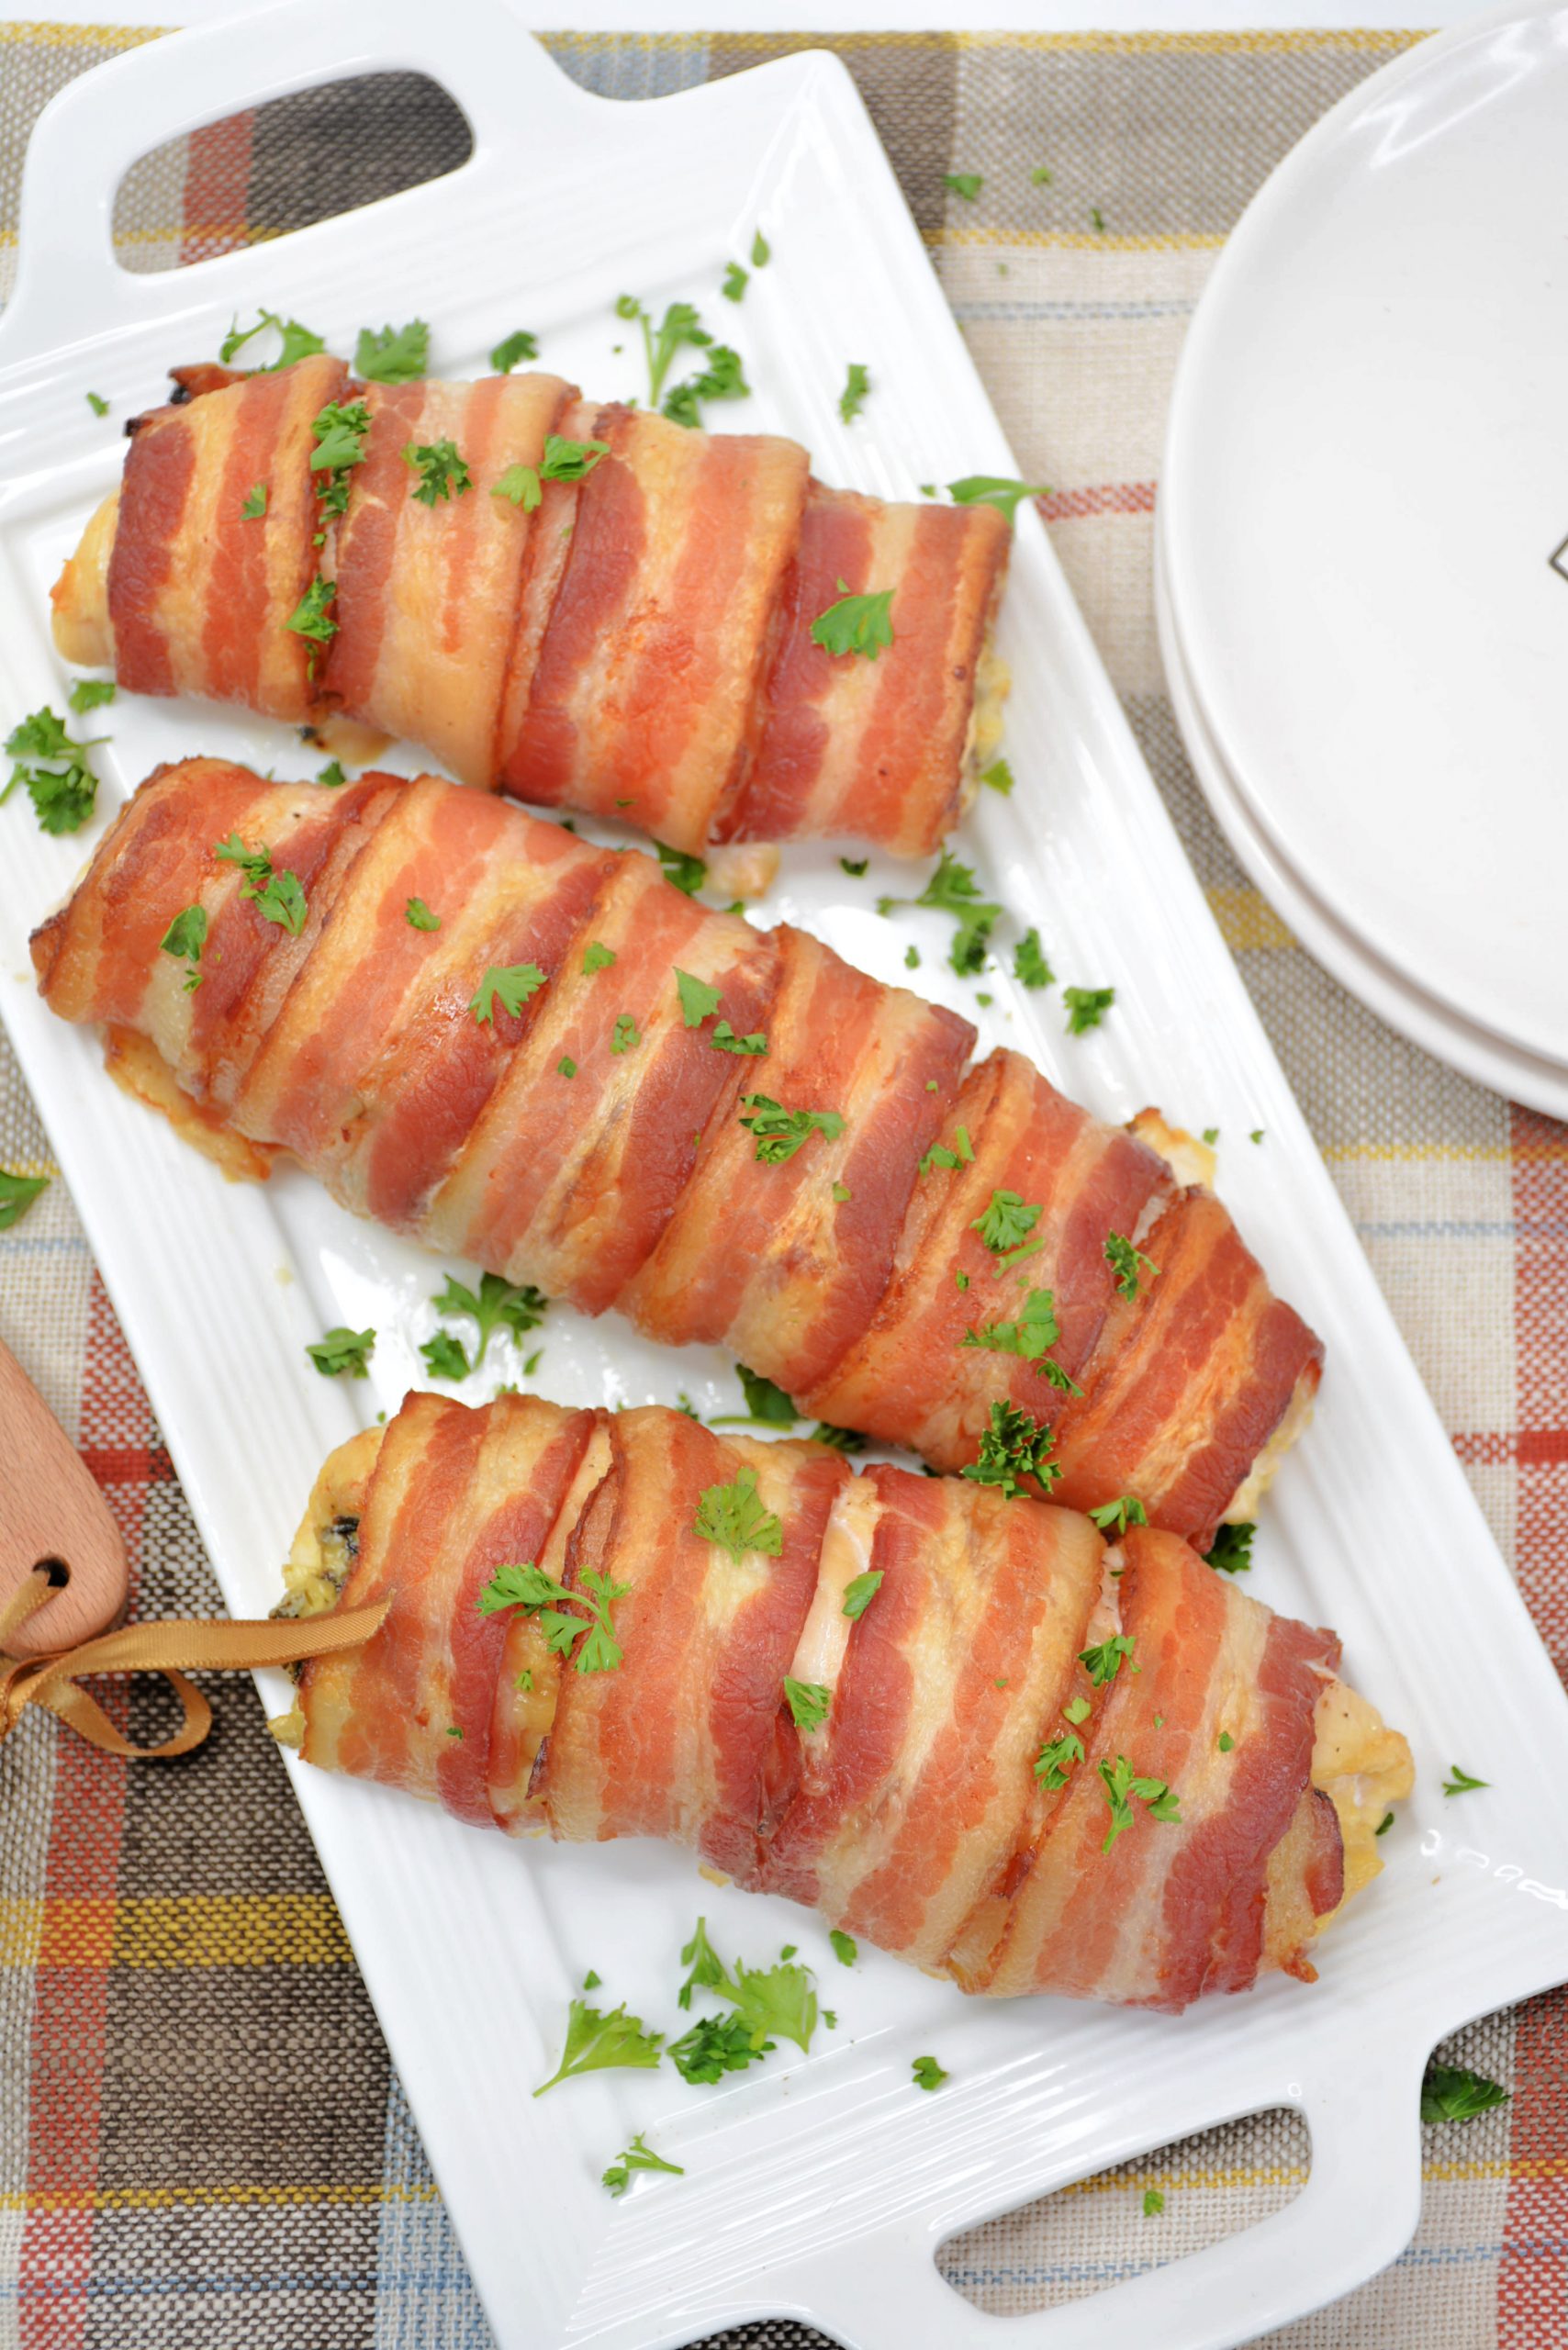 Bacon-wrapped stuffed chicken 